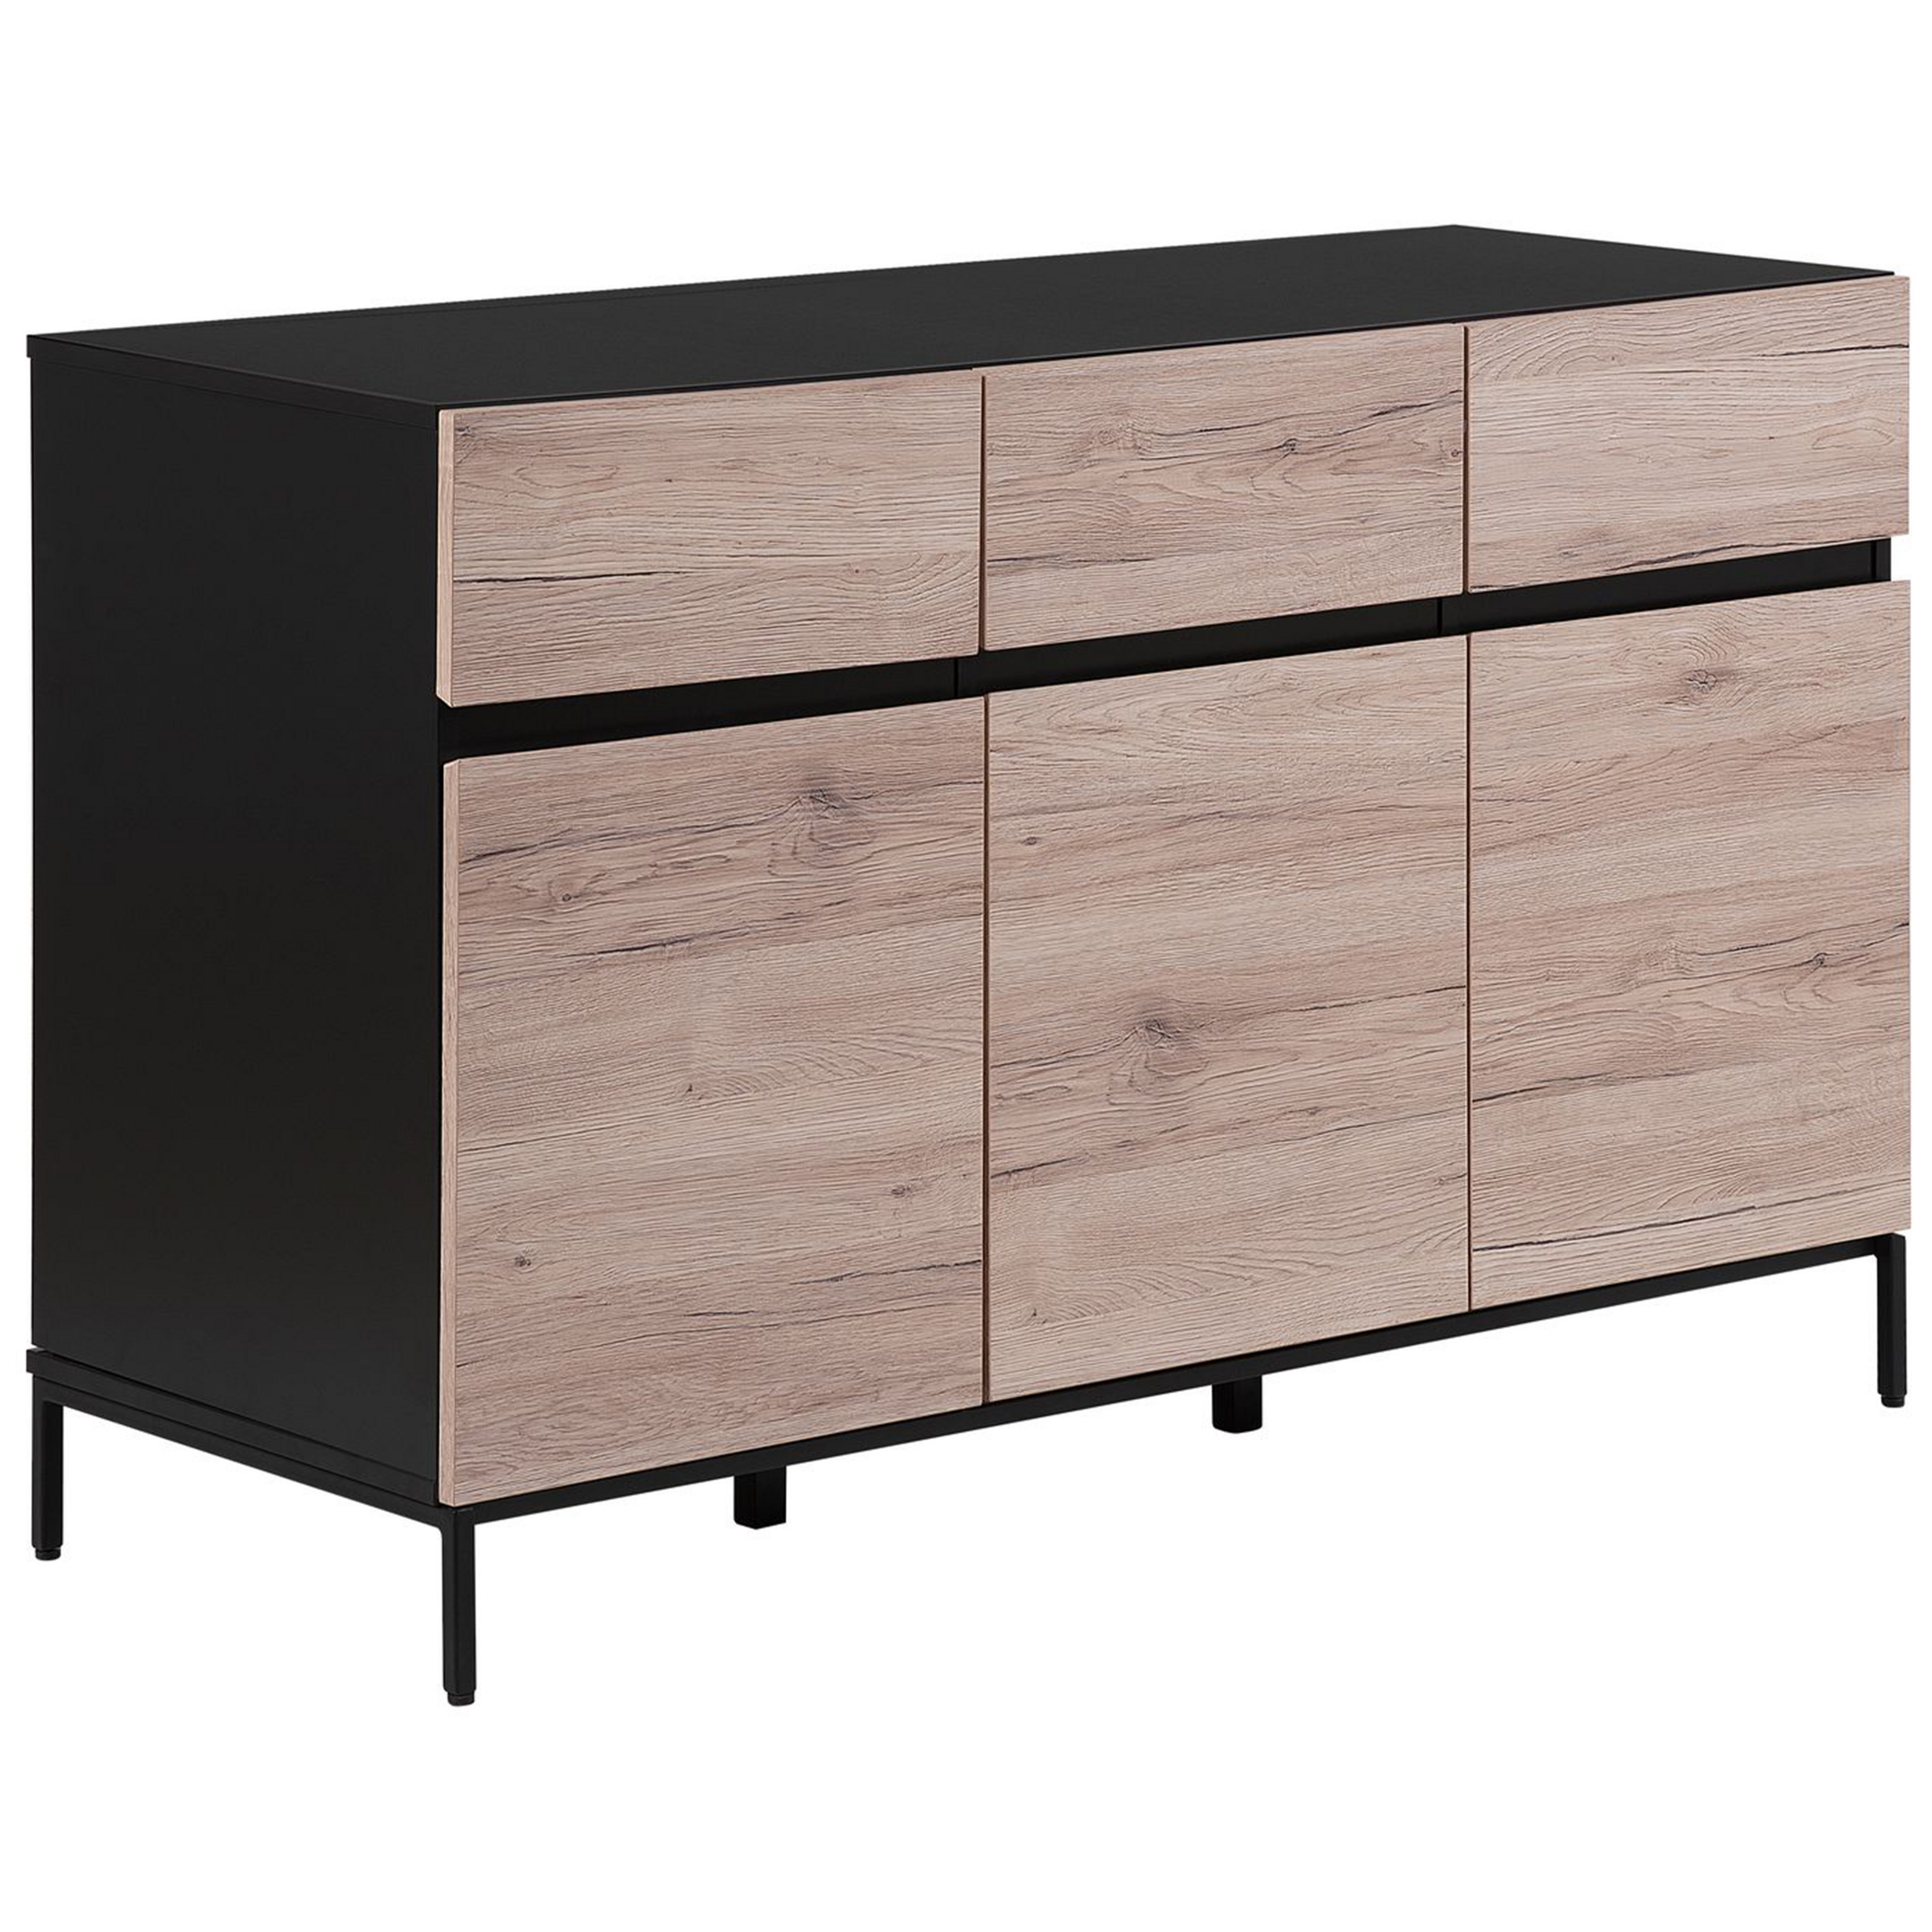 Beliani Sideboard Light Wood with Black Top 3 Drawers Cabinets Chest of Drawers